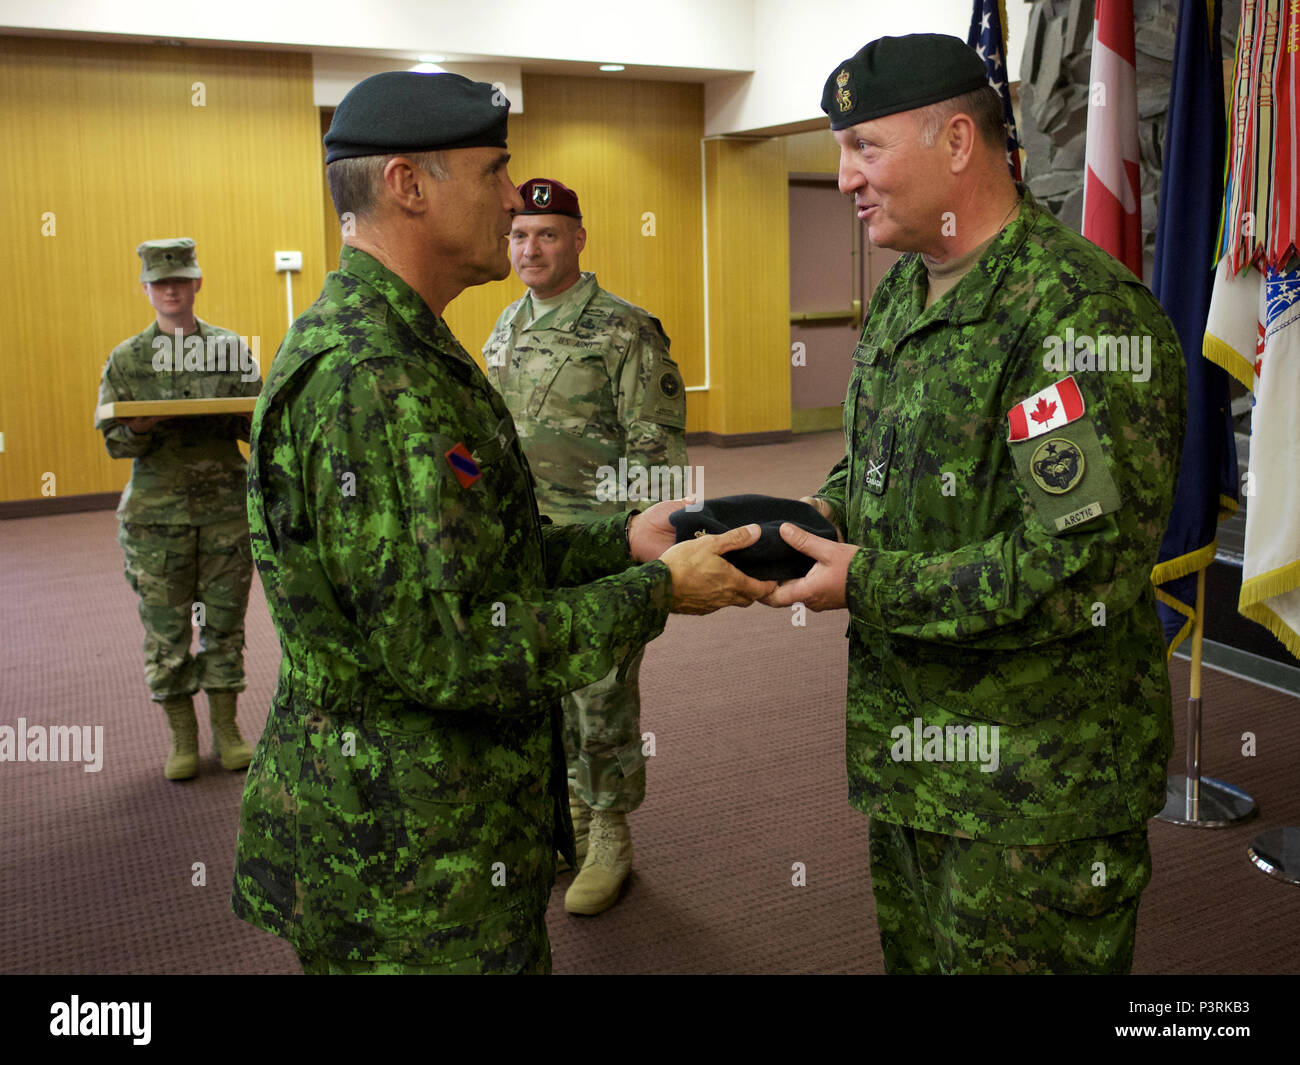 Canadian Army Brig. Gen. Martin Frank (right), U.S. Army Alaska deputy  commander - operations, receives a beret with his new rank insignia from Canadian  Army Maj. Gen. J.C.G. Juneau, Canadian Army deputy